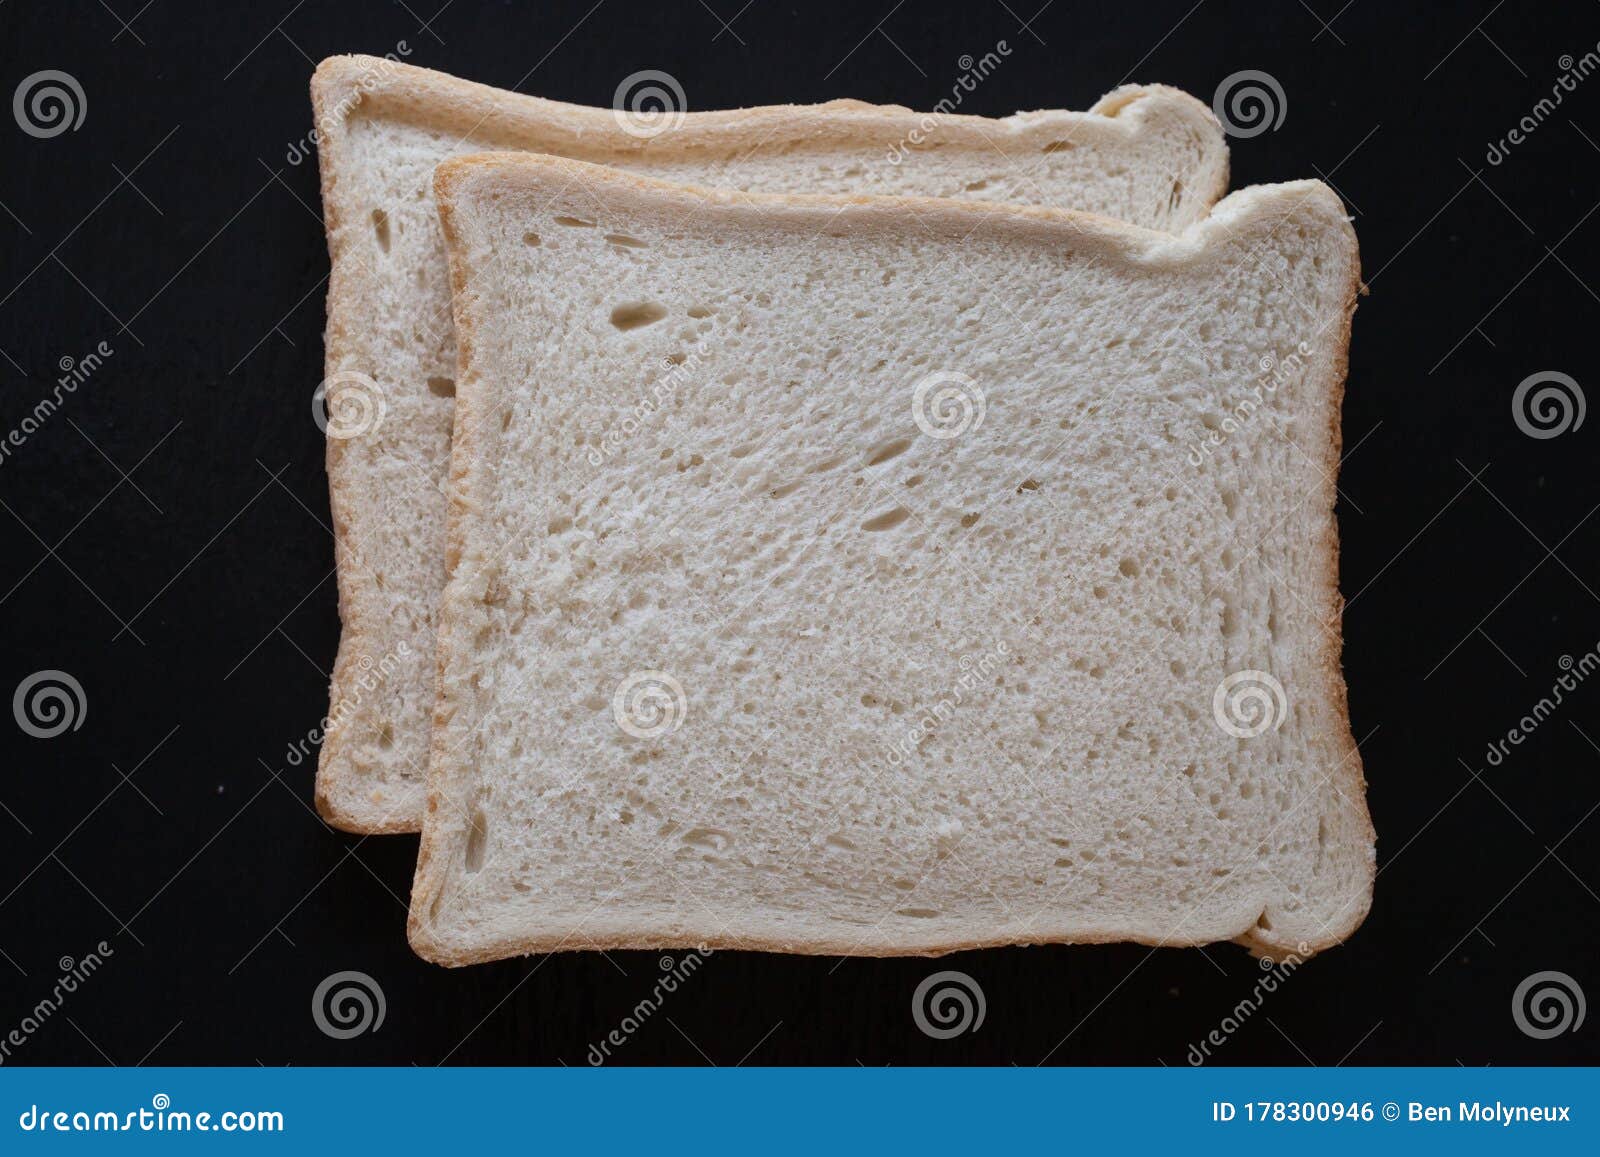 two slices of white bread on a black background